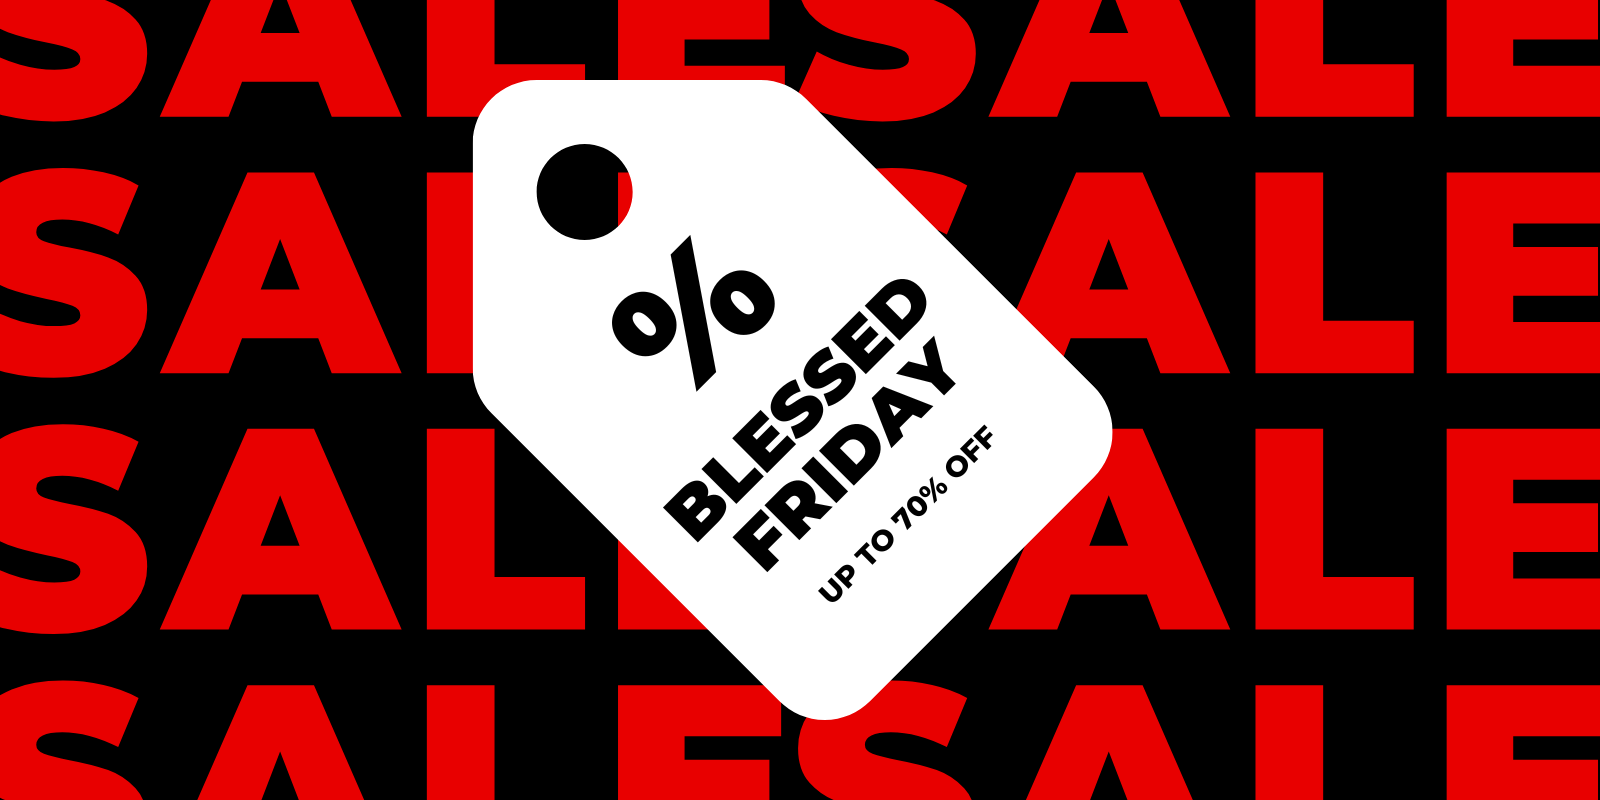 Blessed Friday Sale